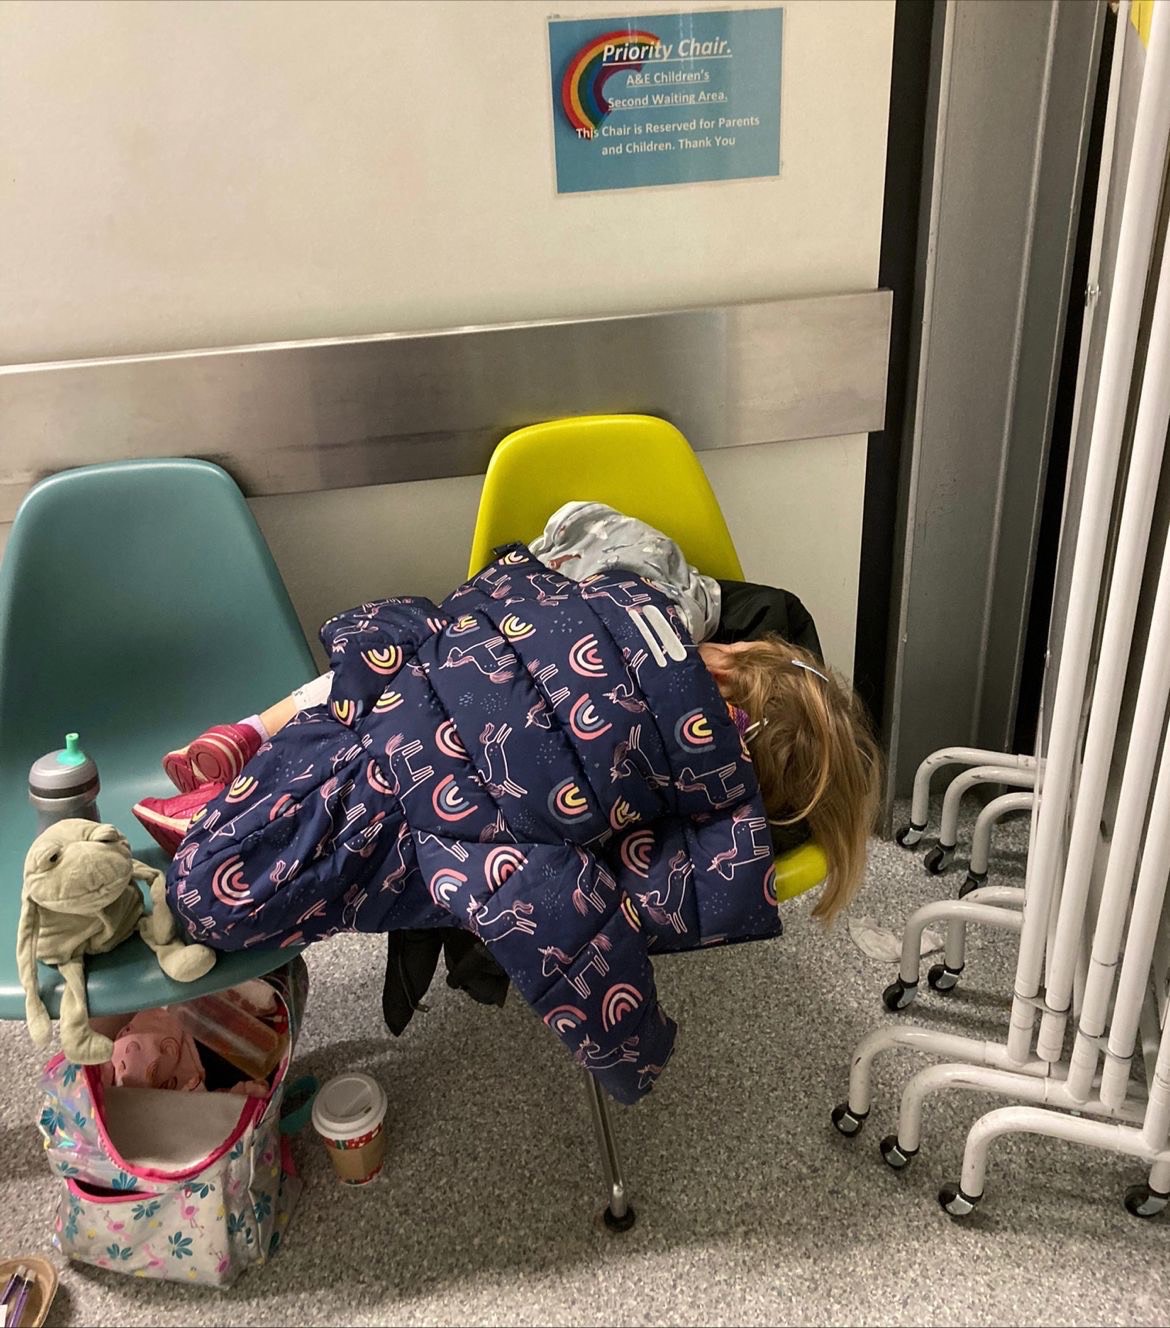 Heidi Hook, 3, suffering from scarlet fever and croup, had to sleep on chairs as she waited to be seen at John Radcliffe Hospital, Oxford, UK on 17 December 2022. Her father, Tom Hook, wrote, “I won’t be making the obligatory end of year post about my work achievements this year. Instead, this is a photo of my sick 3-year-old daughter and her ‘bed’ in hospital at 5am. Exhausted, dehydrated, and fighting multiple illnesses, this is the best the NHS could do, 5 hours after arriving at A&E and 22 hours after we phoned for help. Every step to get to this point showed signs of failure. The call centre, the triage, pharmacy, and GP service all failed. Service failure in the NHS is real and it seems to be collapsing in front of our eyes. Do not let our government celebrate a single damn thing until this stops. No champagne receptions or nice dinners, no ermine robed pageantry. Do. Your. Job.” Record numbers of patients were being nursed in corridors in “grossly overcrowded” emergency departments. Dozens of NHS trusts have declared critical incidents in the first week of January 2023, with some forced to return to tactics last used at the height of the pandemic. Photo: The Sunday Times 